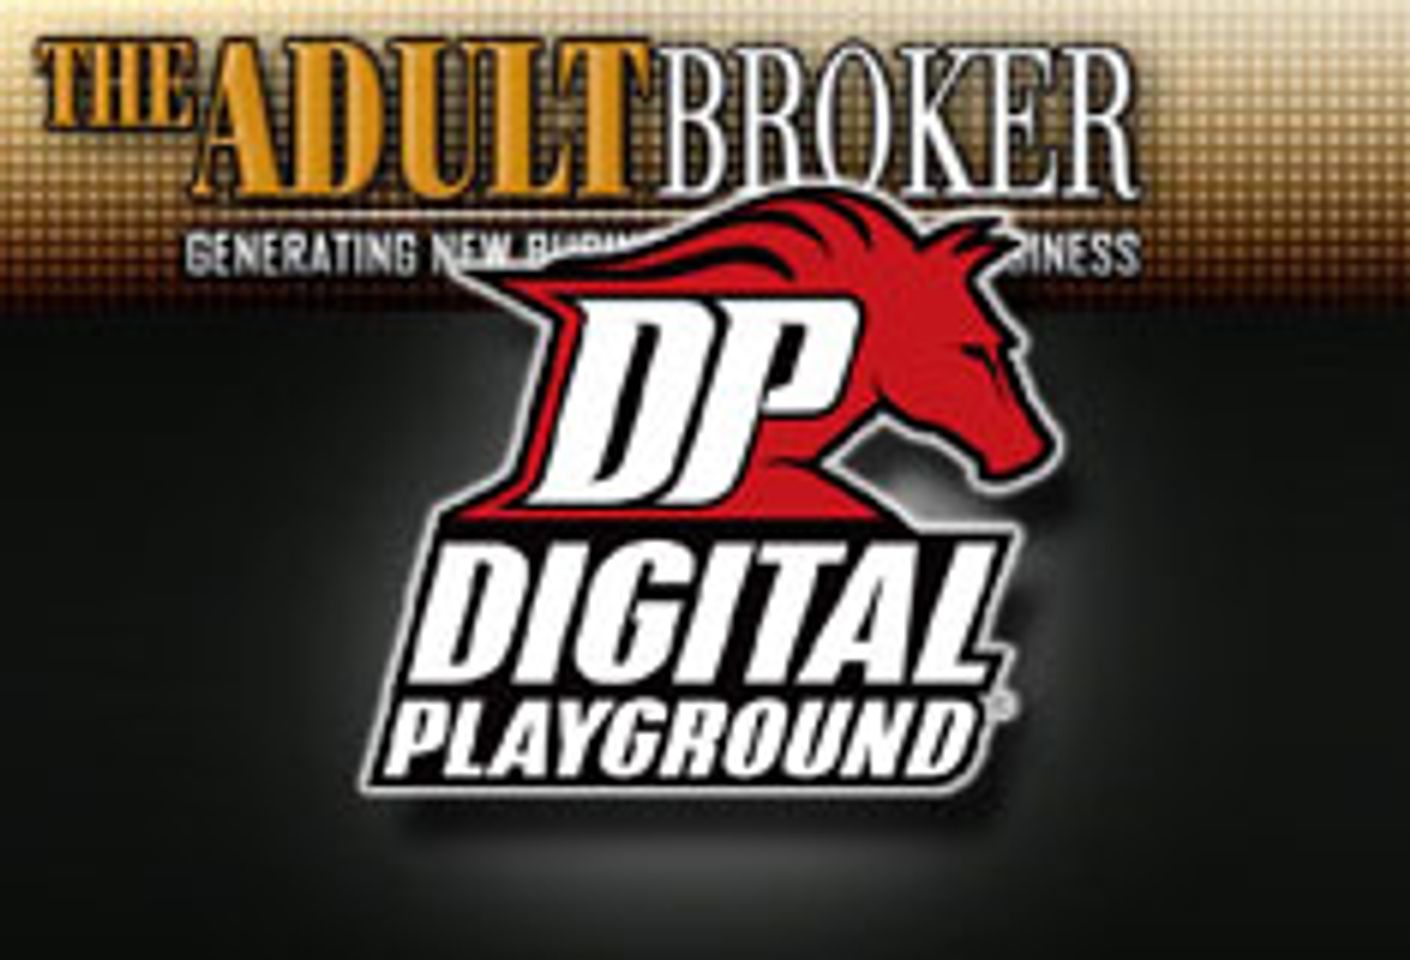 Digital Playground Signs The Adult Broker for Online Representation